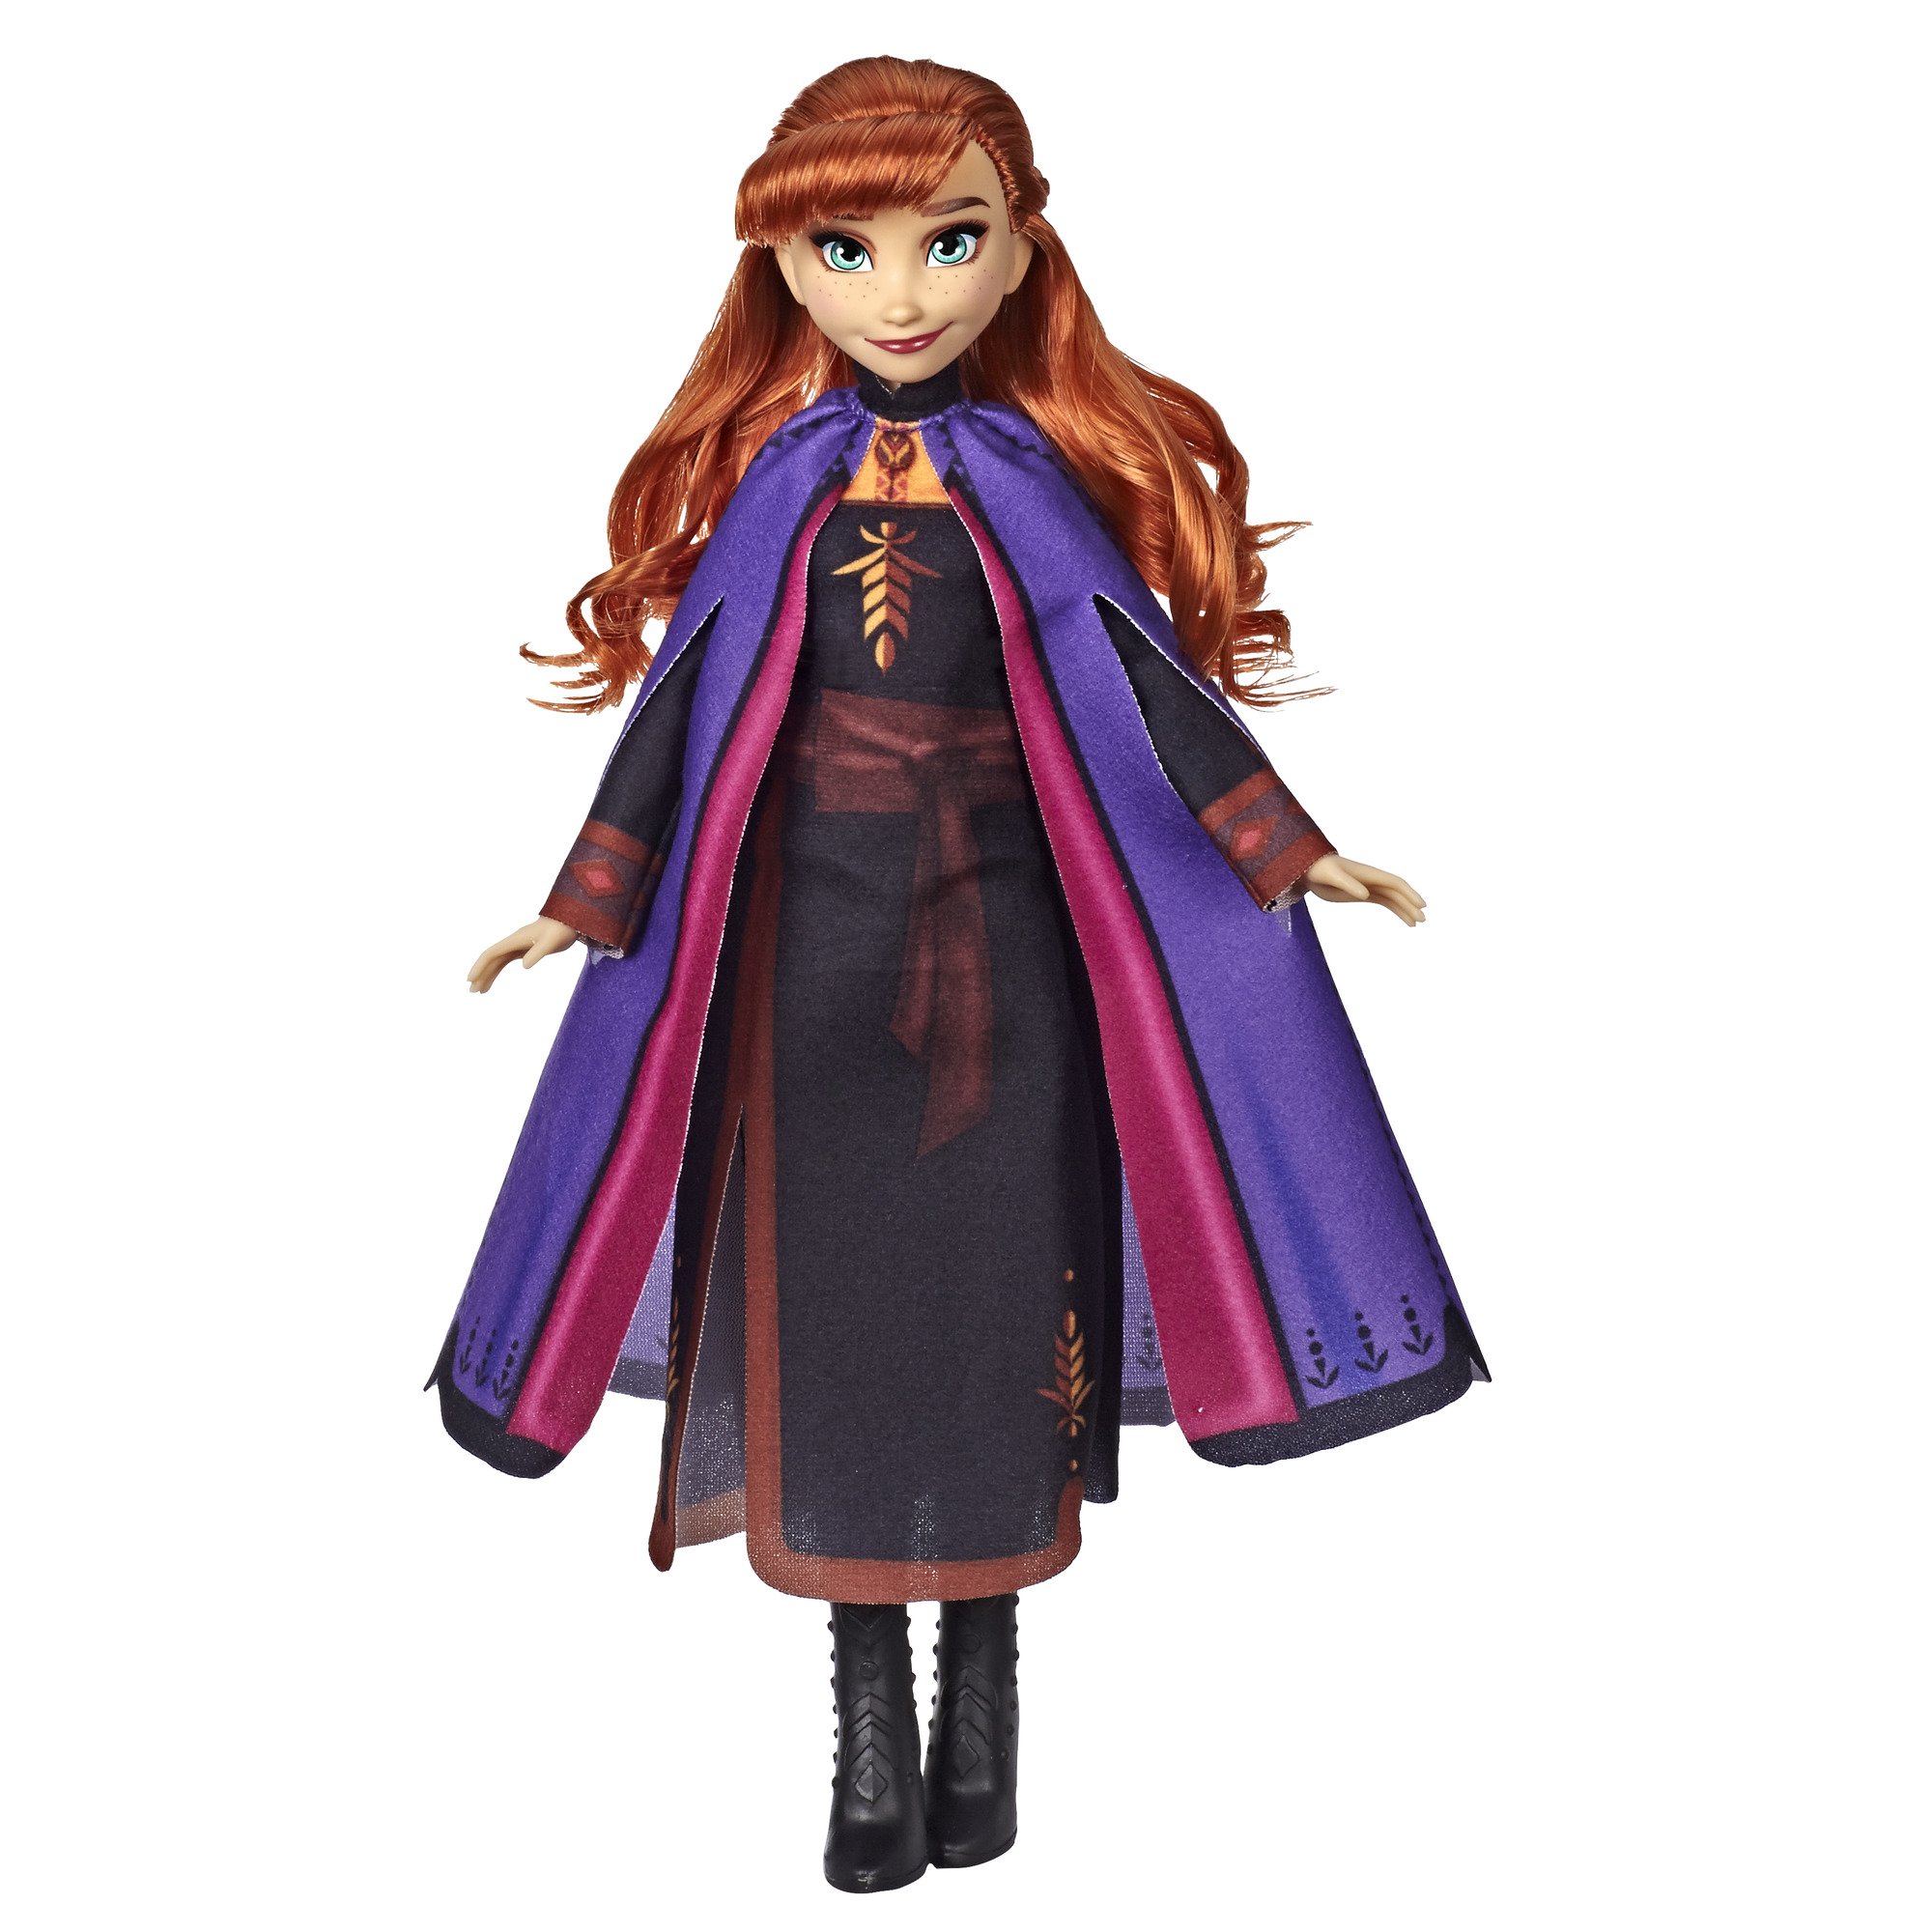 Disney Frozen 2 Anna Fashion Doll w/ Long Red Hair and Cape $7 + 6% SD Cashback (PC Req'd) at Macy's w/ Free Store Pickup or Free S&H on $25+